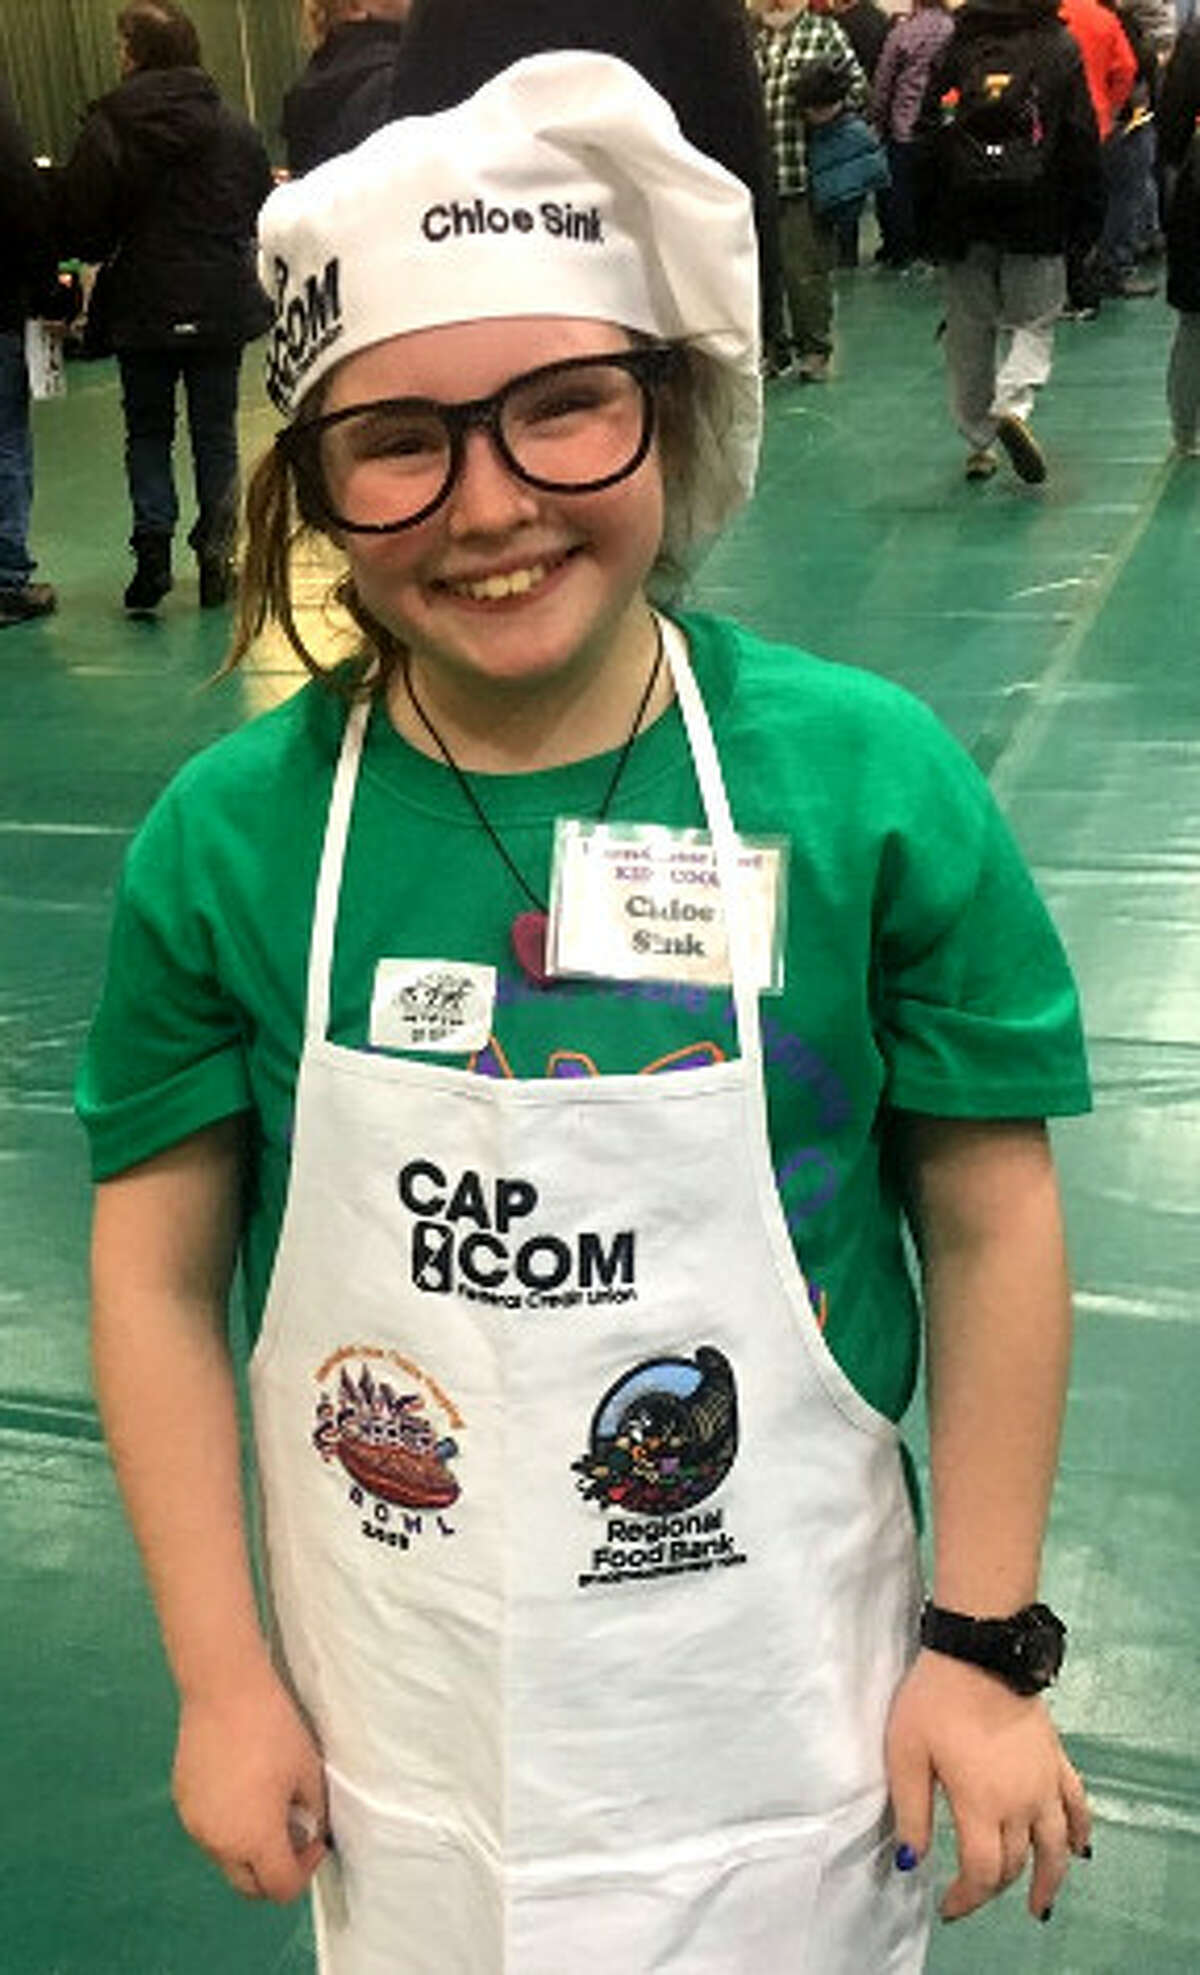 Winning kid cook Chloe Sink of Albany at the 2019 Mac-n-Cheese Bowl. Unable to defend her title in 2020 or again in 2021 because of pandemic-related restrictions, Sink returns to the Mac-n-Cheese Bowl as a competitor in the amateur adult category on March 26, when the event will be held as a street festival in Cohoes.